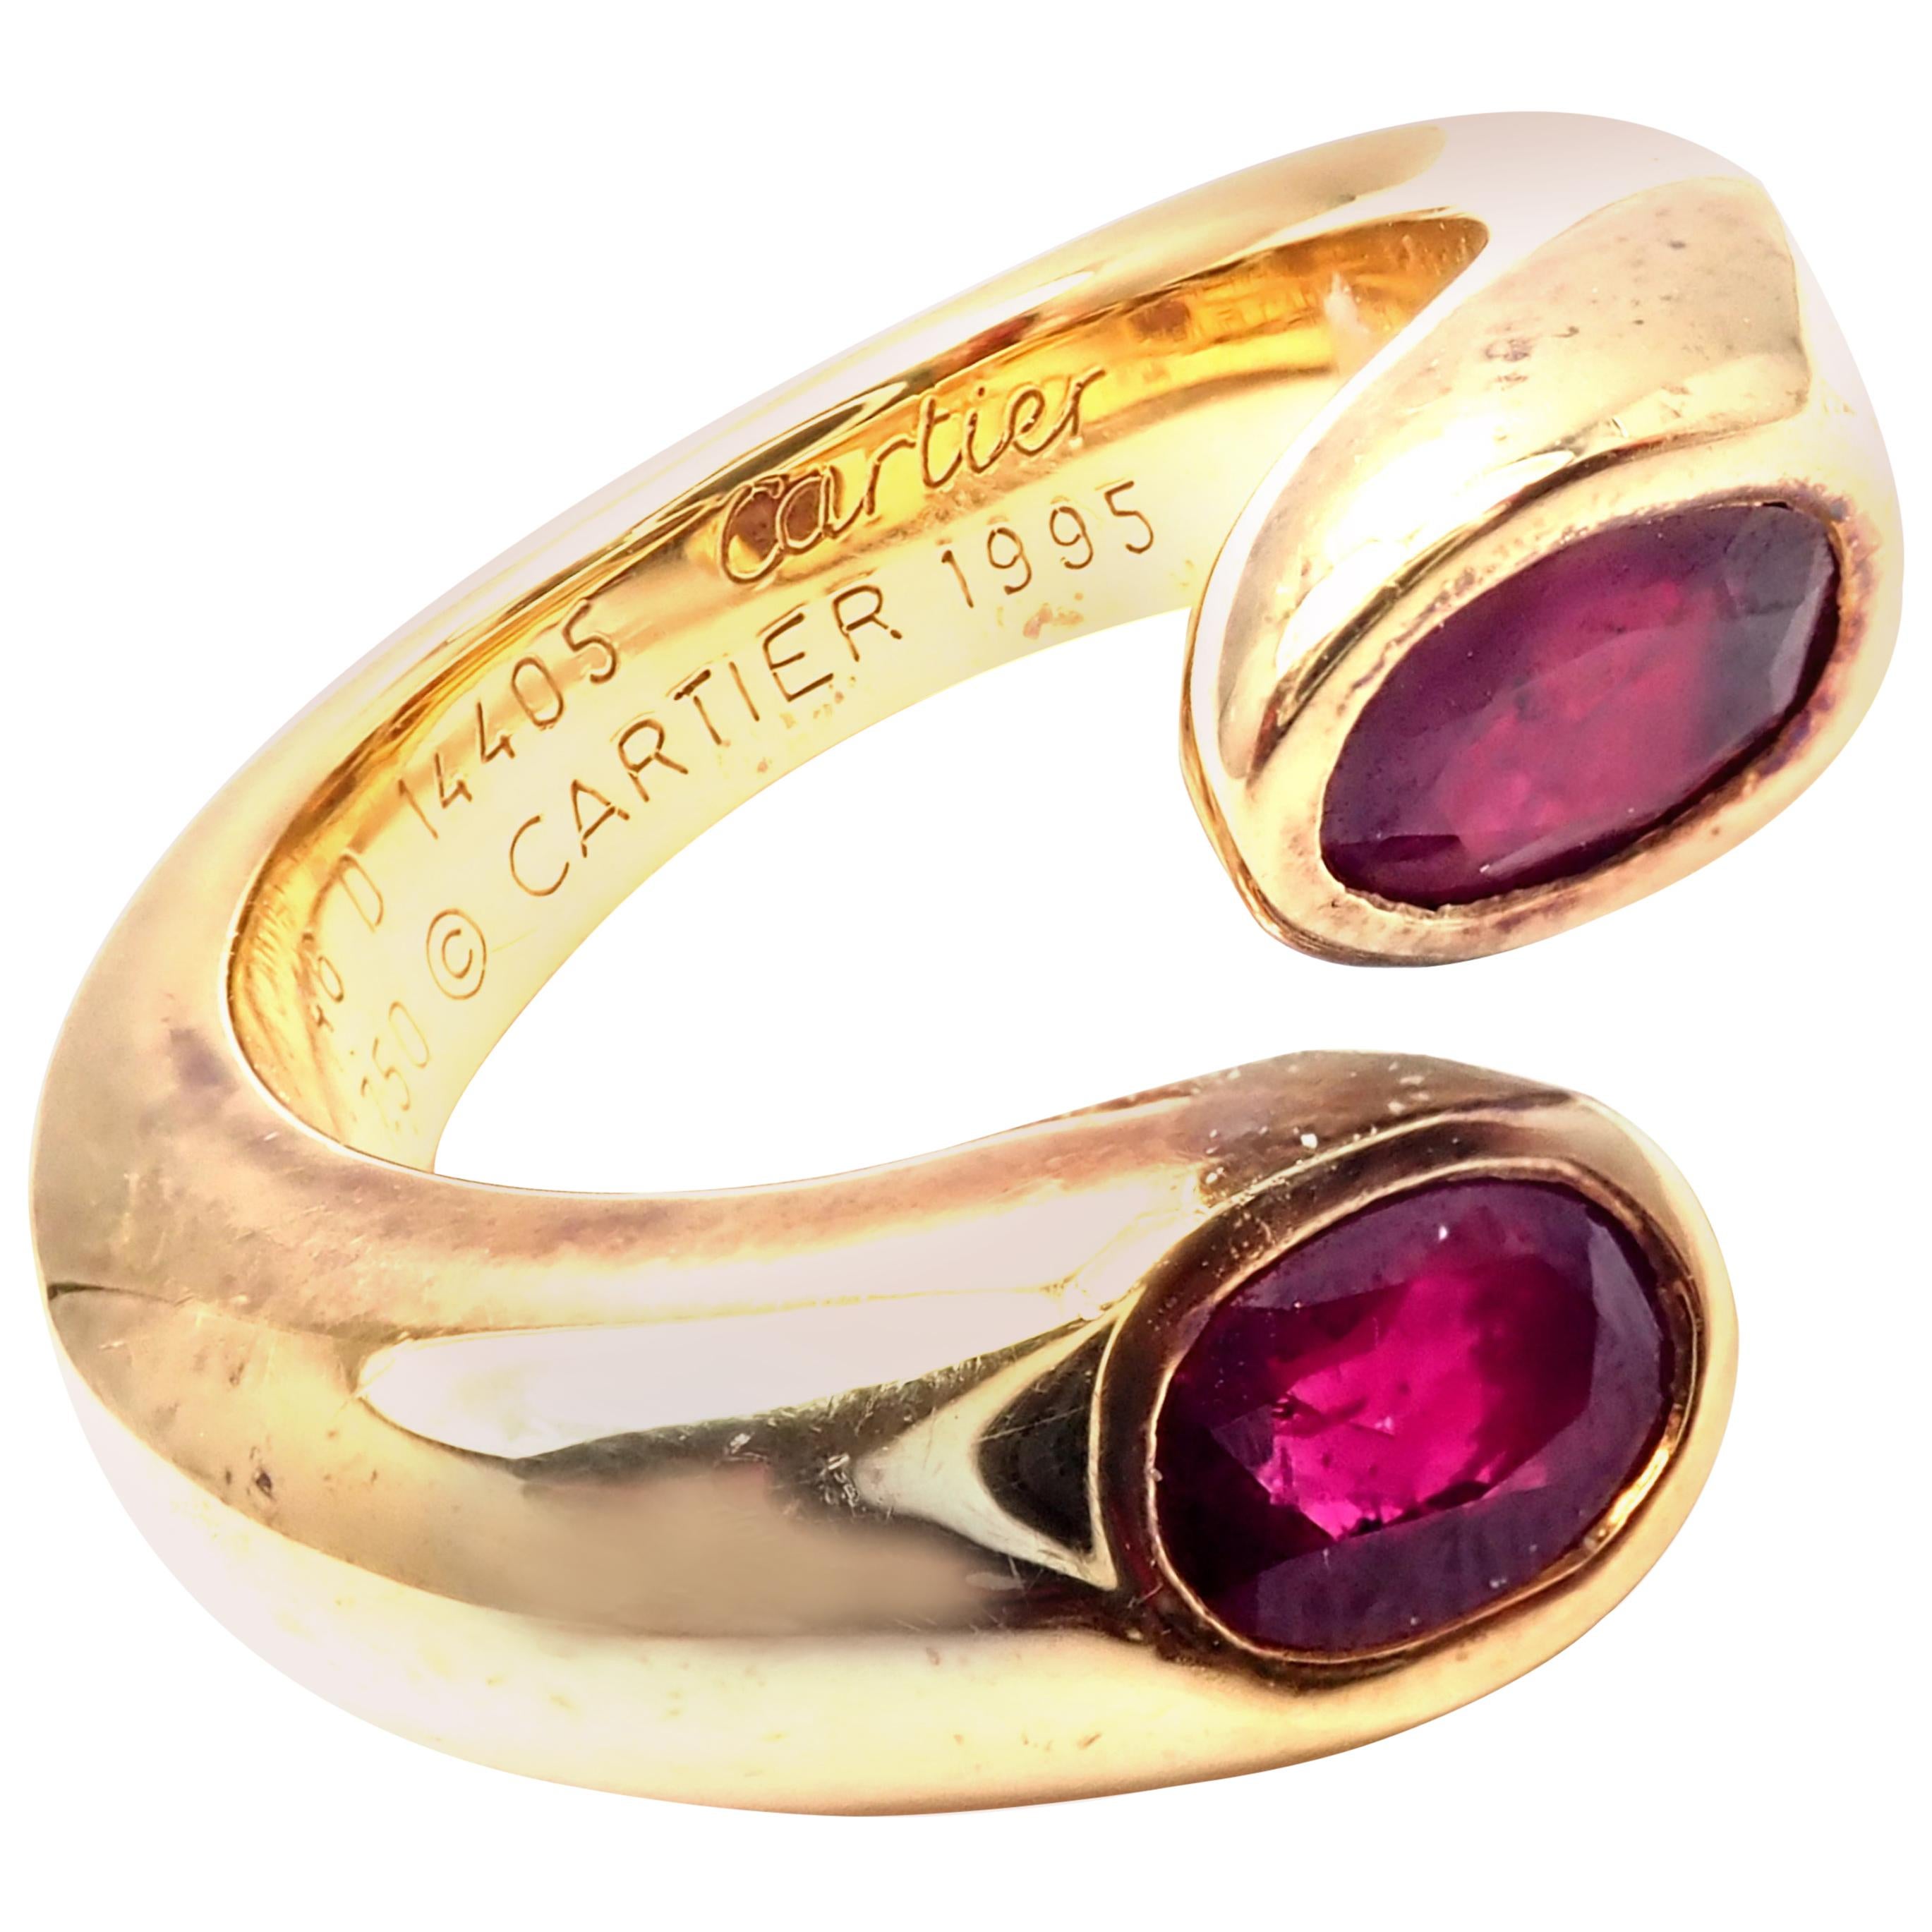 Cartier Ruby Ellipse Deux Tetes Croisees Bypass Yellow Gold Band Ring